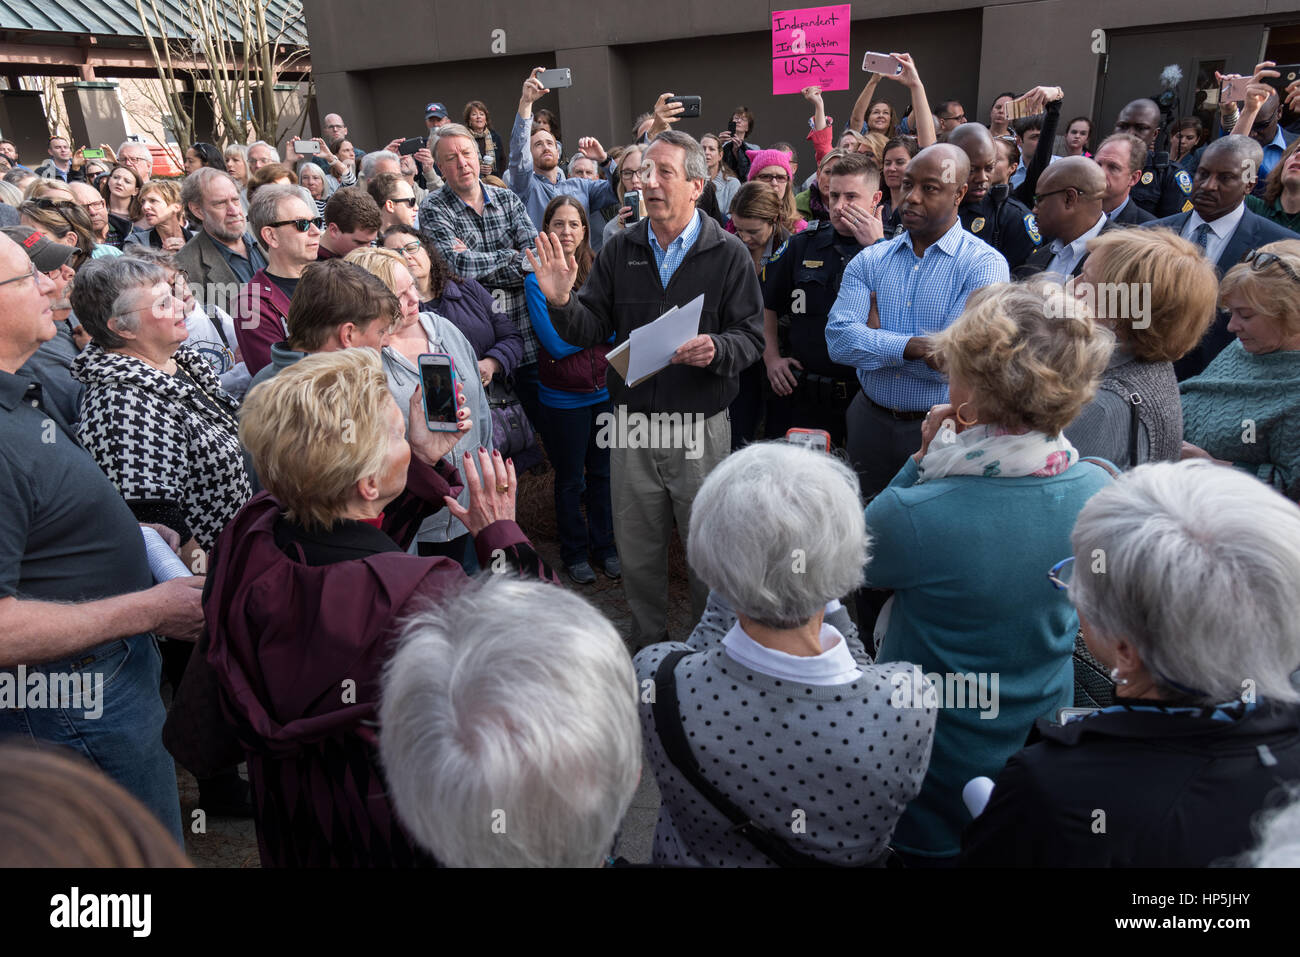 Mount Pleasant, South Carolina, USA. 18th February, 2017. U.S. Rep. Mark Sanford, center, and U.S. Sen. Tim Scott, right, meet with constituents who could not fit into a town hall meeting to discuss holding a second meeting February 18, 2017 in Mount Pleasant, South Carolina. Hundreds of concerned residents turned up for the meeting to address their opposition to President Donald Trump during a vocal meeting. Credit: Planetpix/Alamy Live News Stock Photo